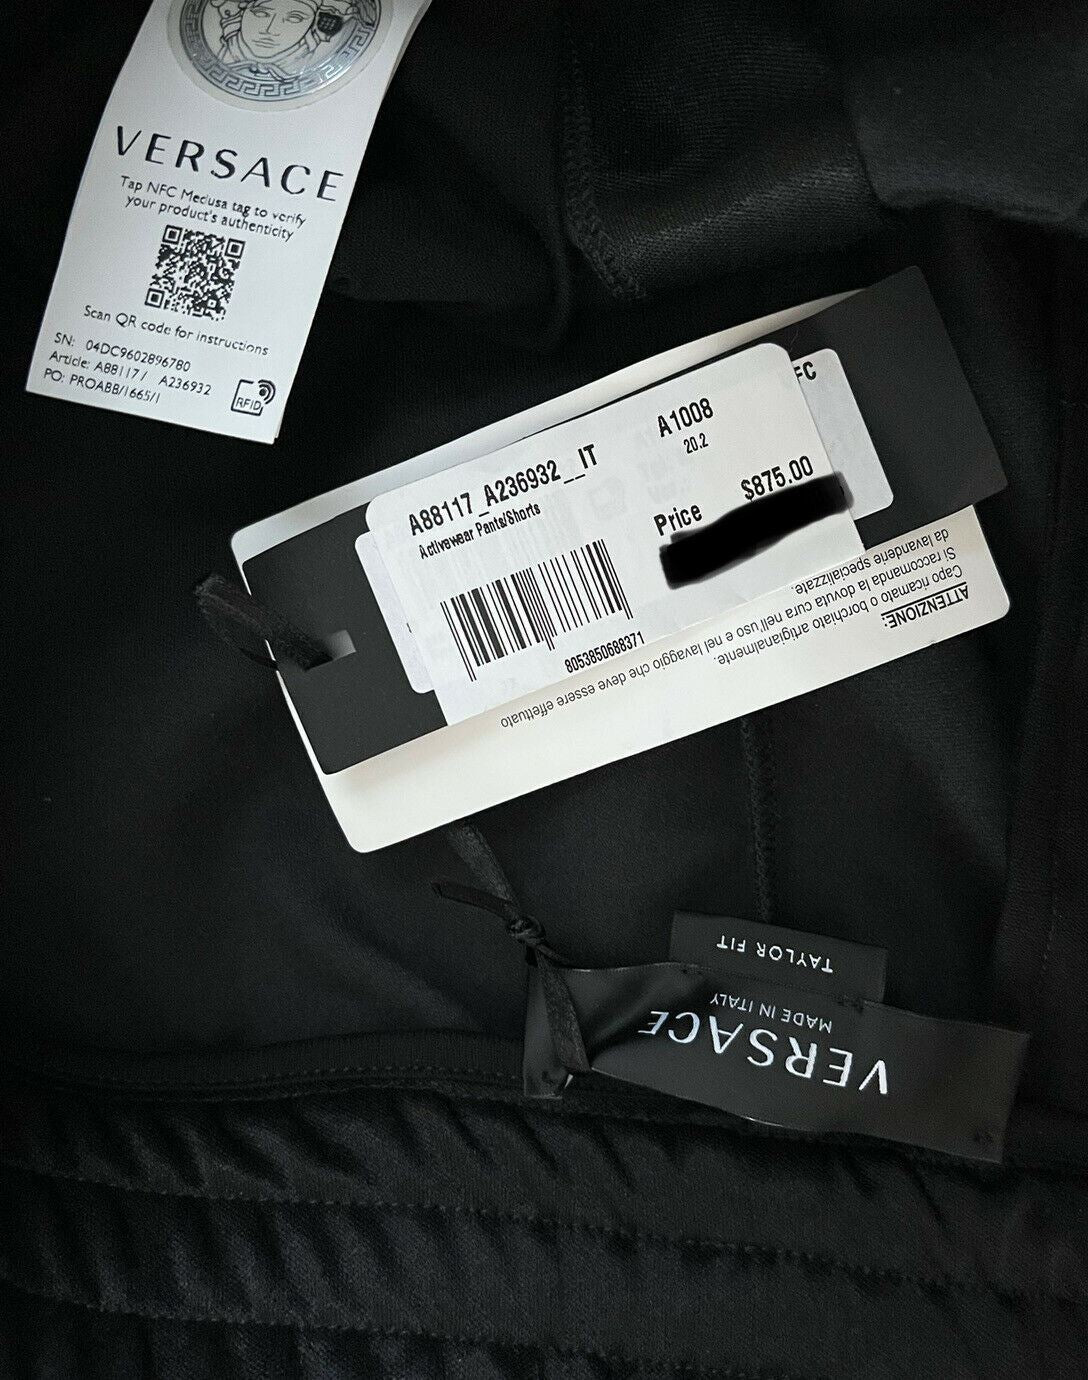 NWT $875 Versace Men's Black Tailor Fit Activewear Pants M Made in Italy A88117